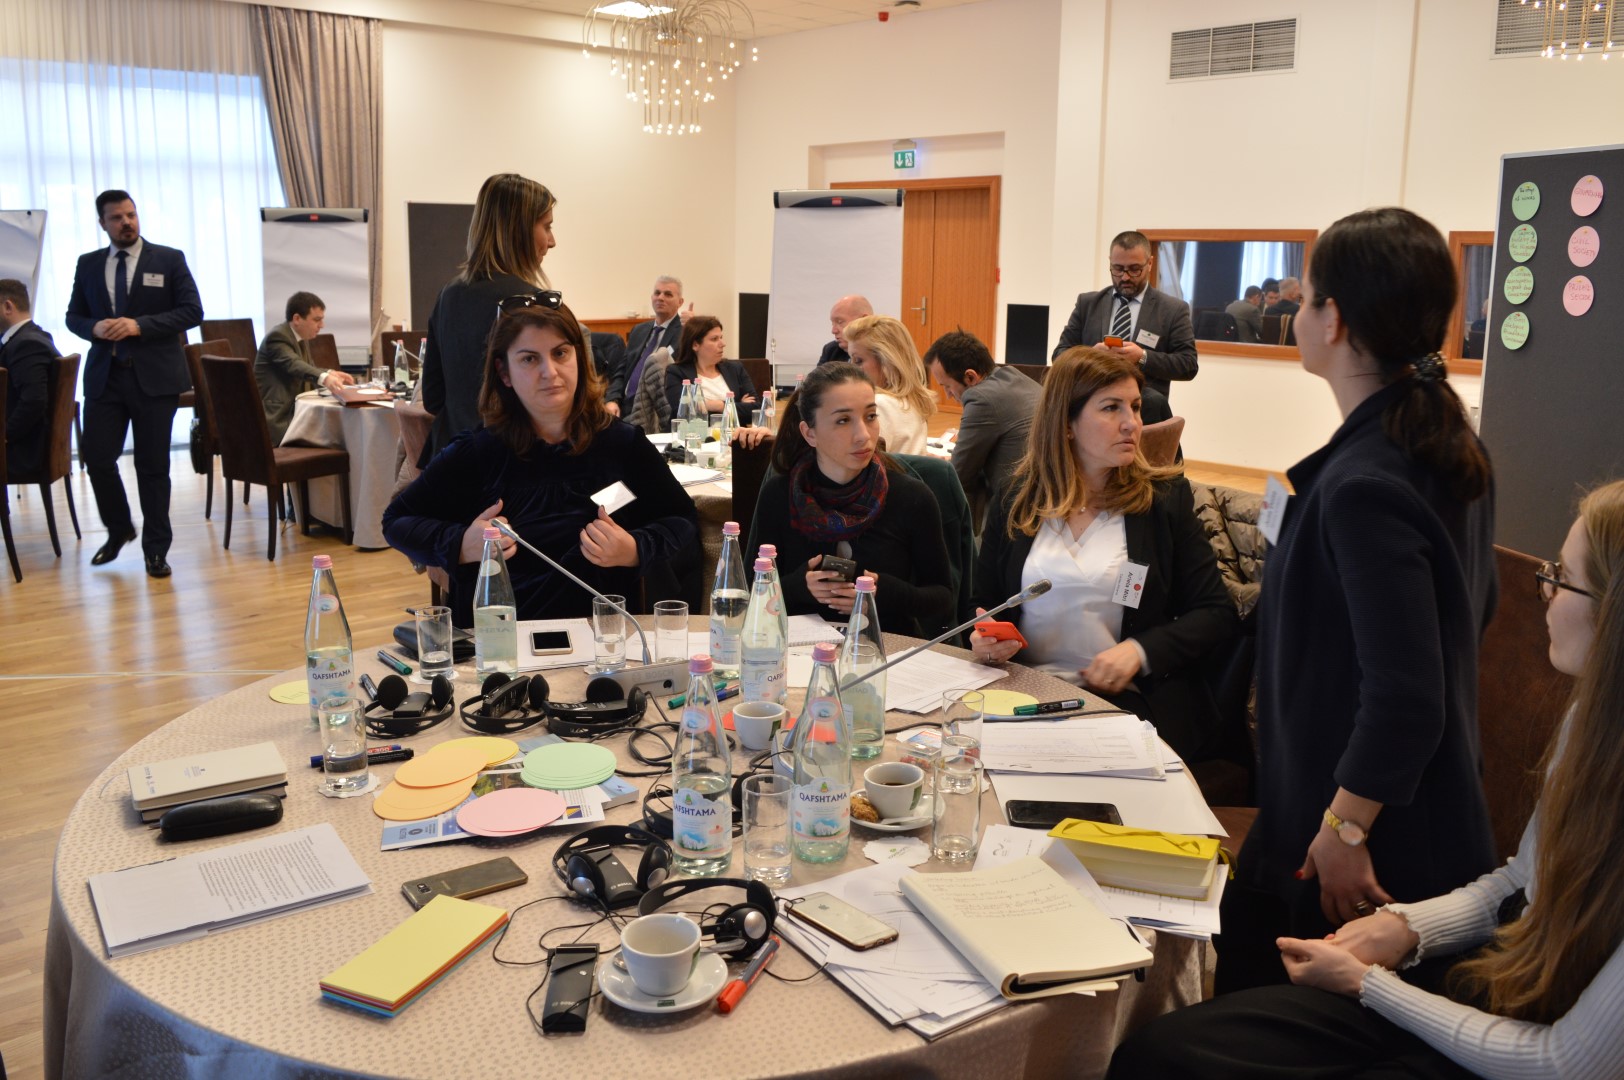 28 February 2019 – Workshop on “Strengthening regional dialogue and cooperation on migration” in Tirana